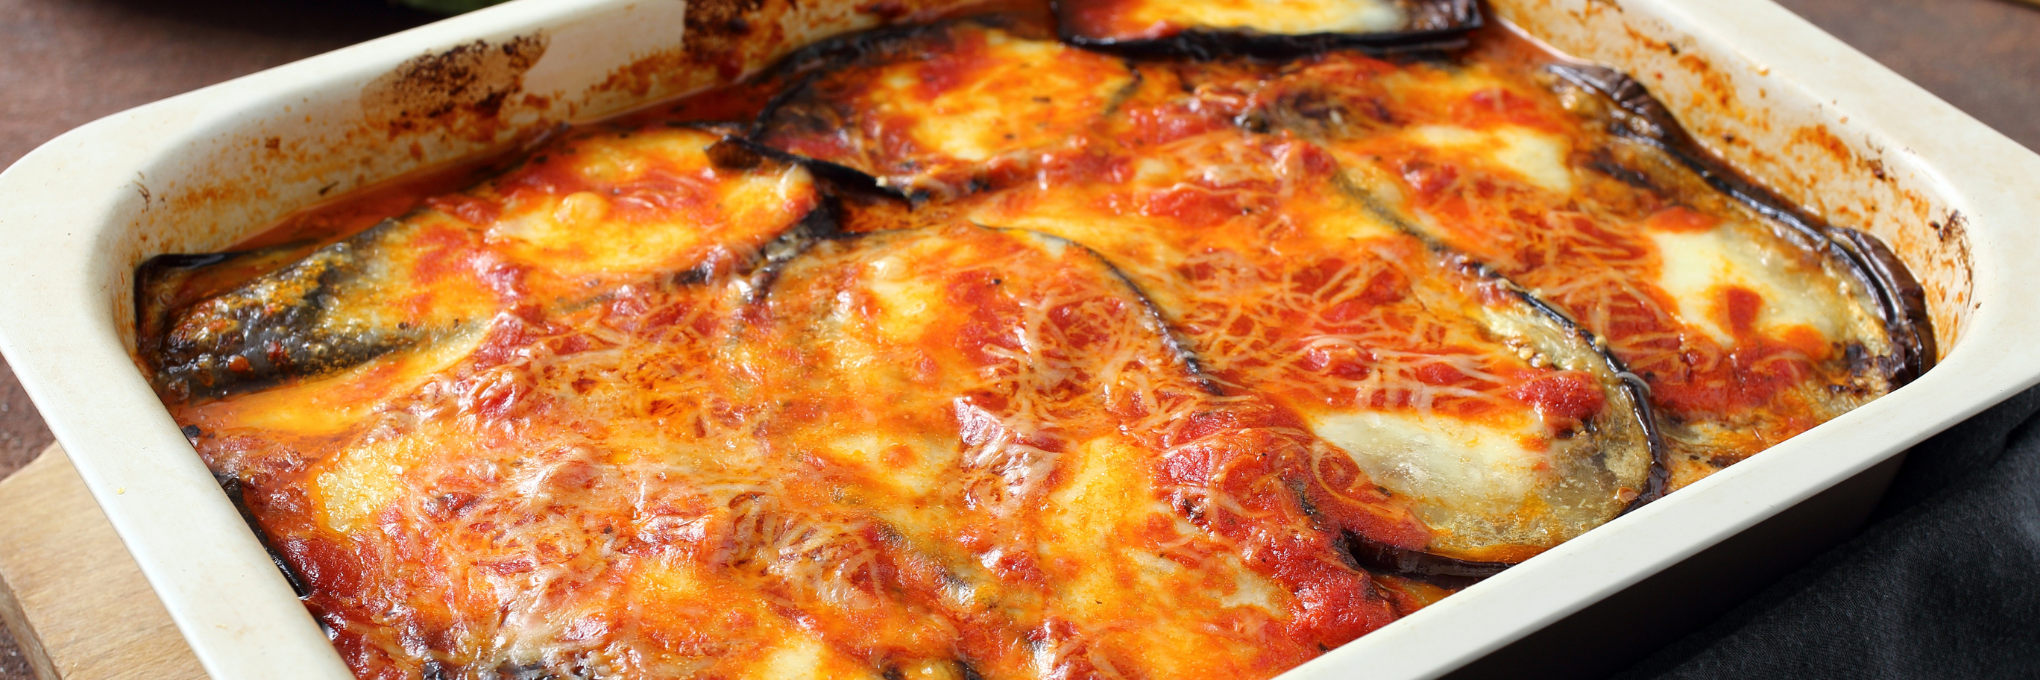 What Wine Pairs Well with Eggplant Parm?'s Article Visual